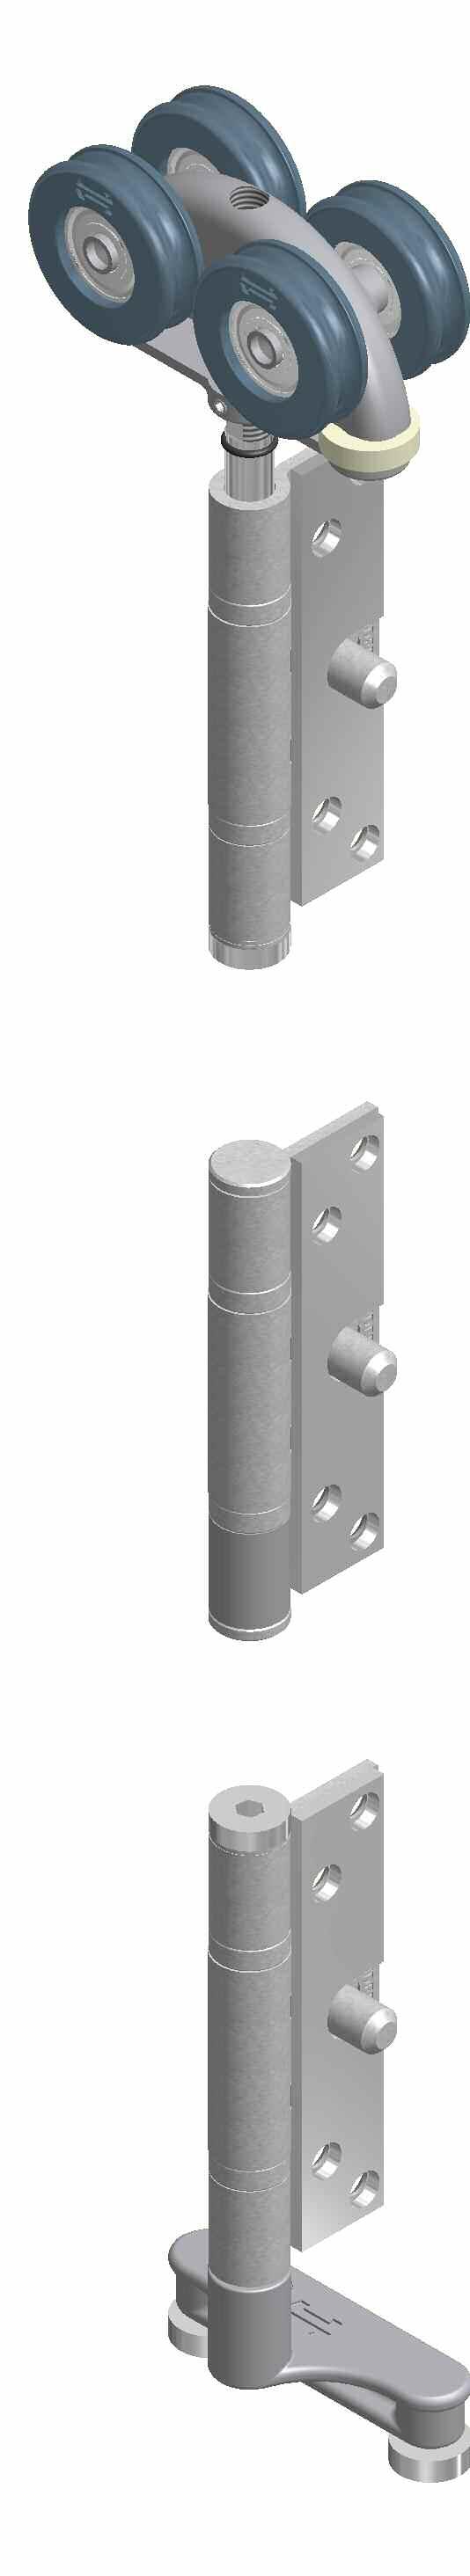 Securefold Ultra system Security screw Hinge bolt reinforcing plate Integrated bridge plate with security screw to prevent removal of the strapbolt